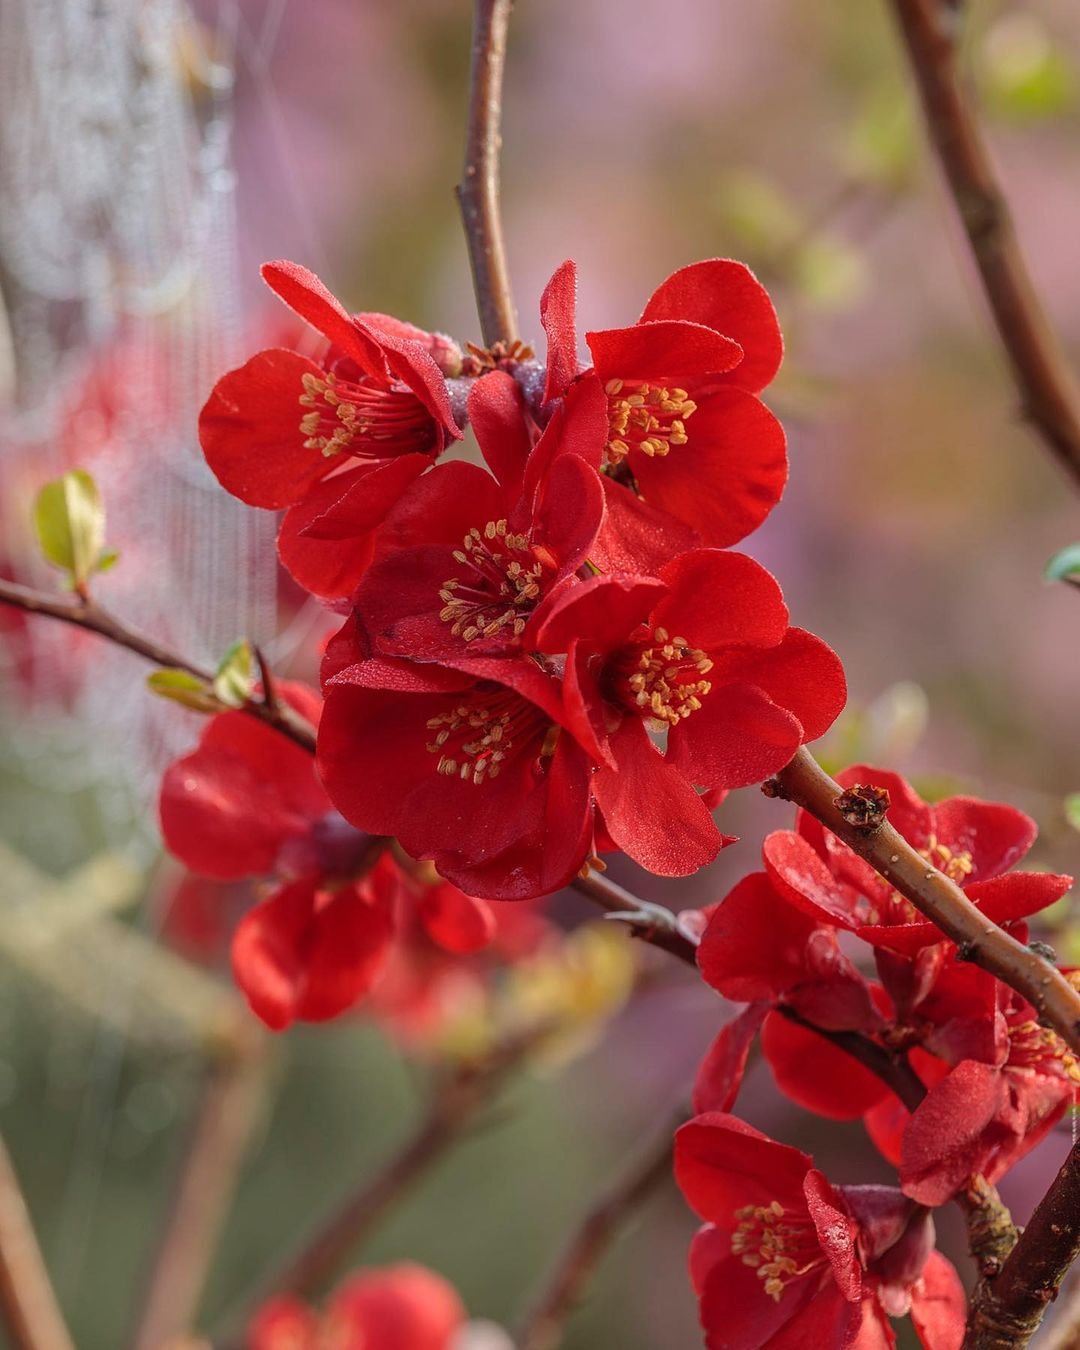 Red Flowering Quince blossoms on a branch with spider web.